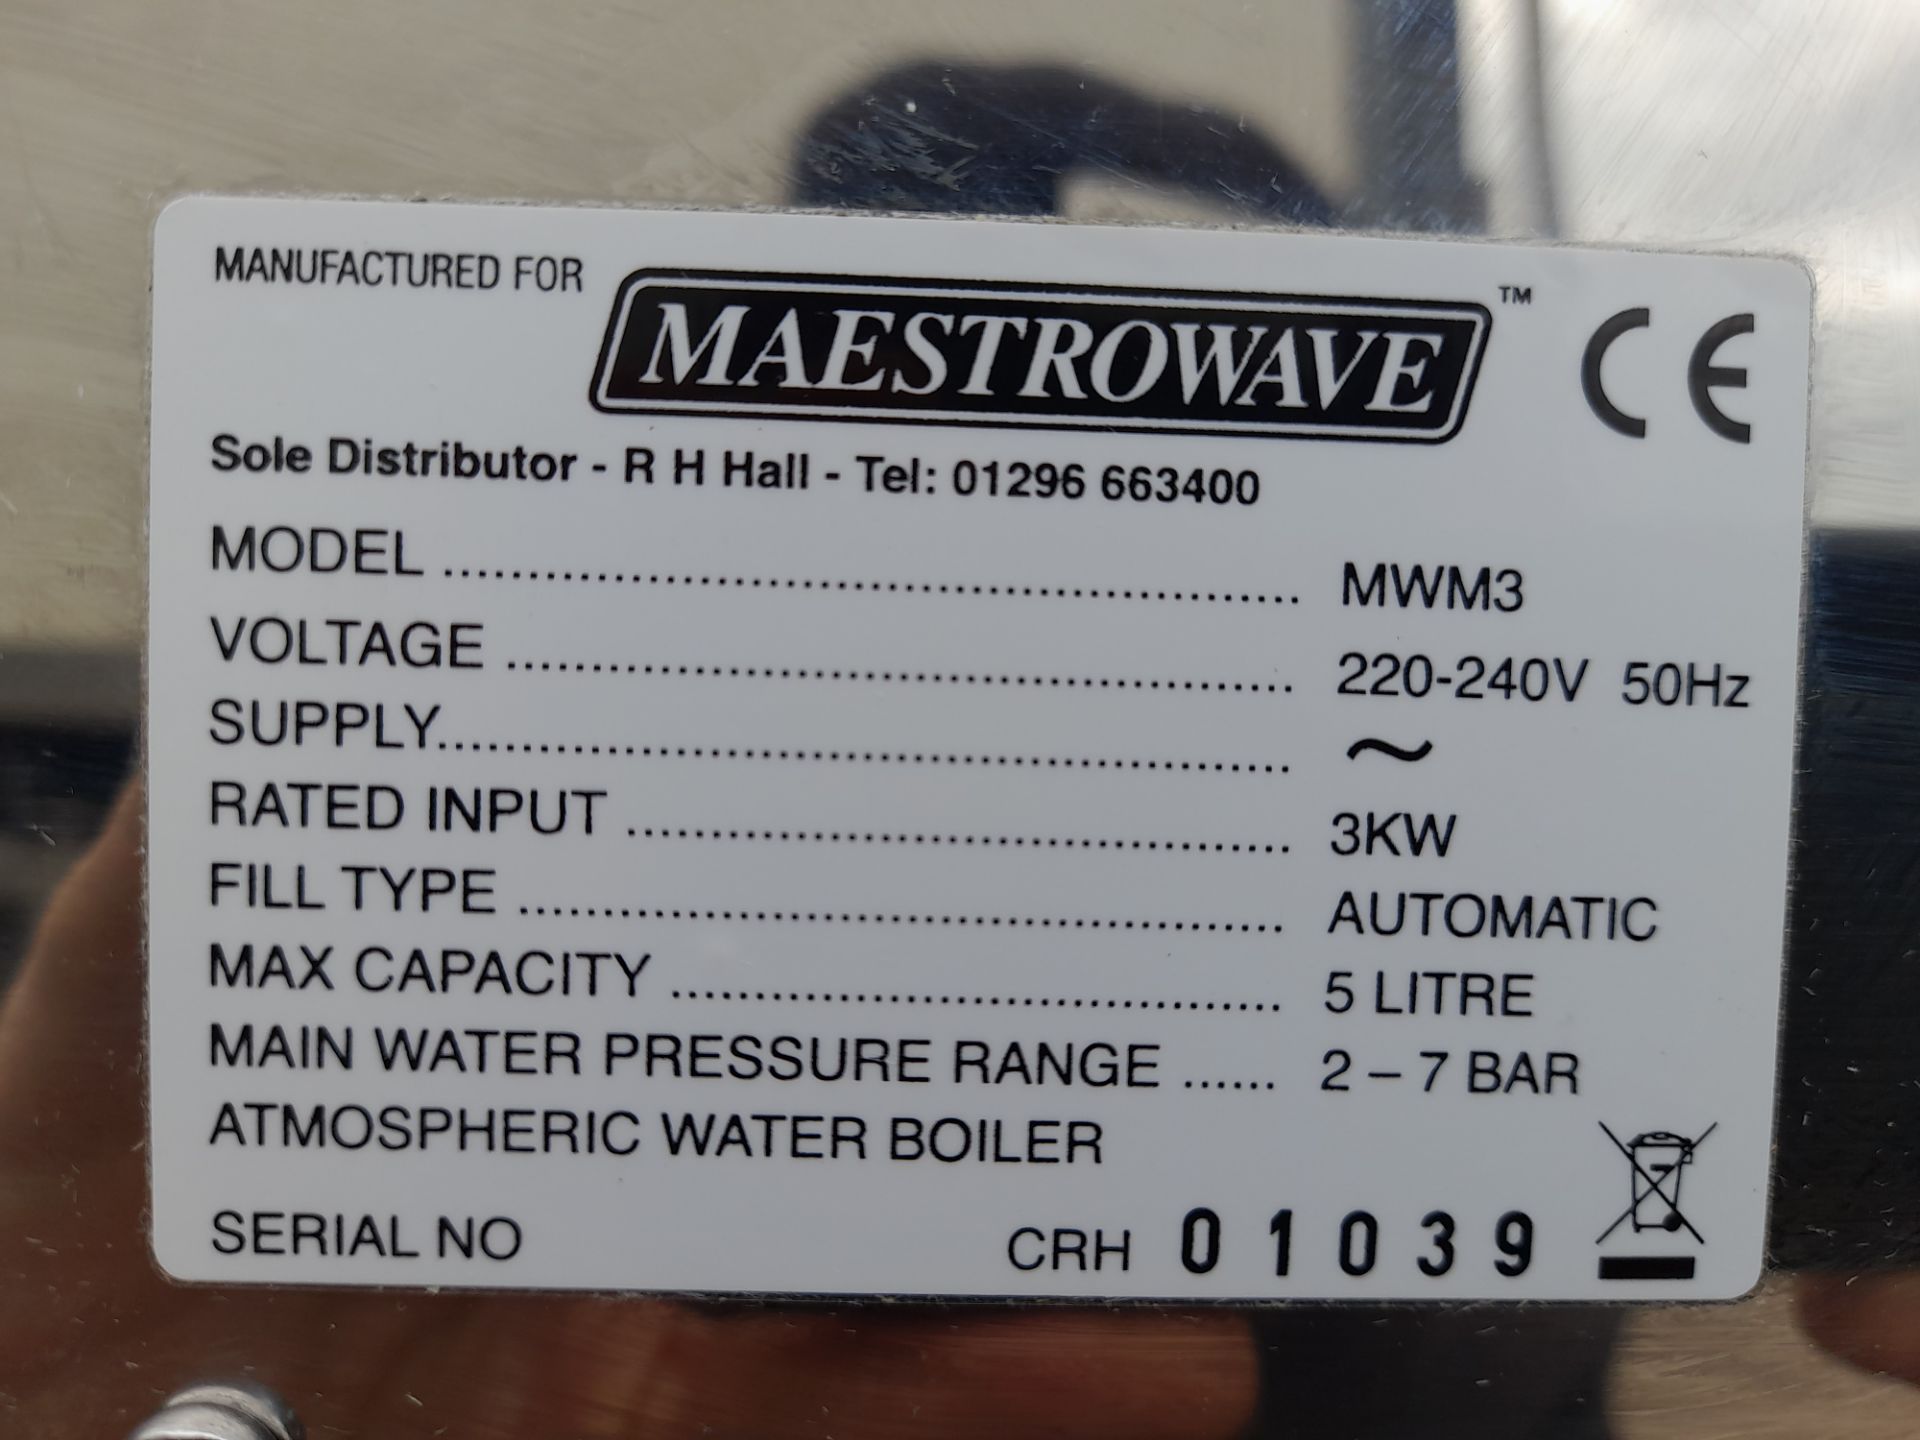 1 x Maestrowave MWM3 Wall Mounted 3kw Hot Water Boiler With Stainless Steel Finish - 240V - Image 2 of 5